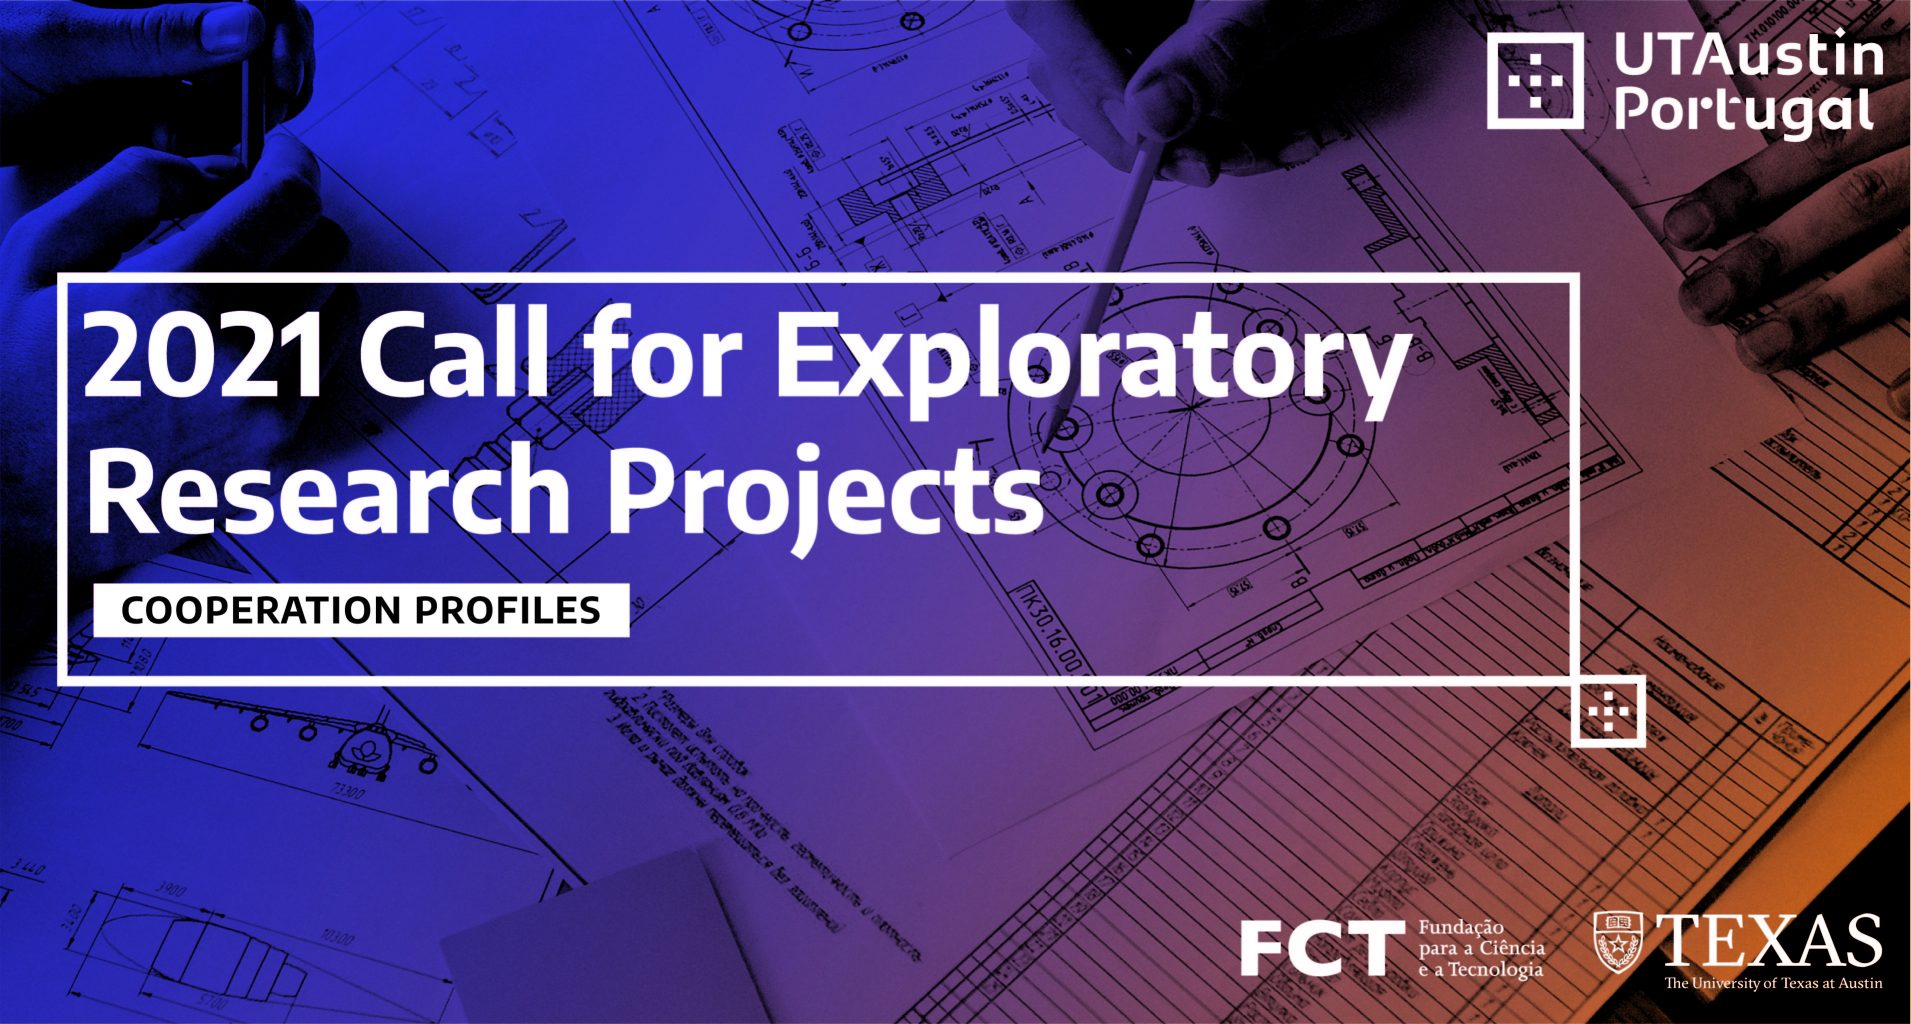 New Call for Exploratory Research Projects